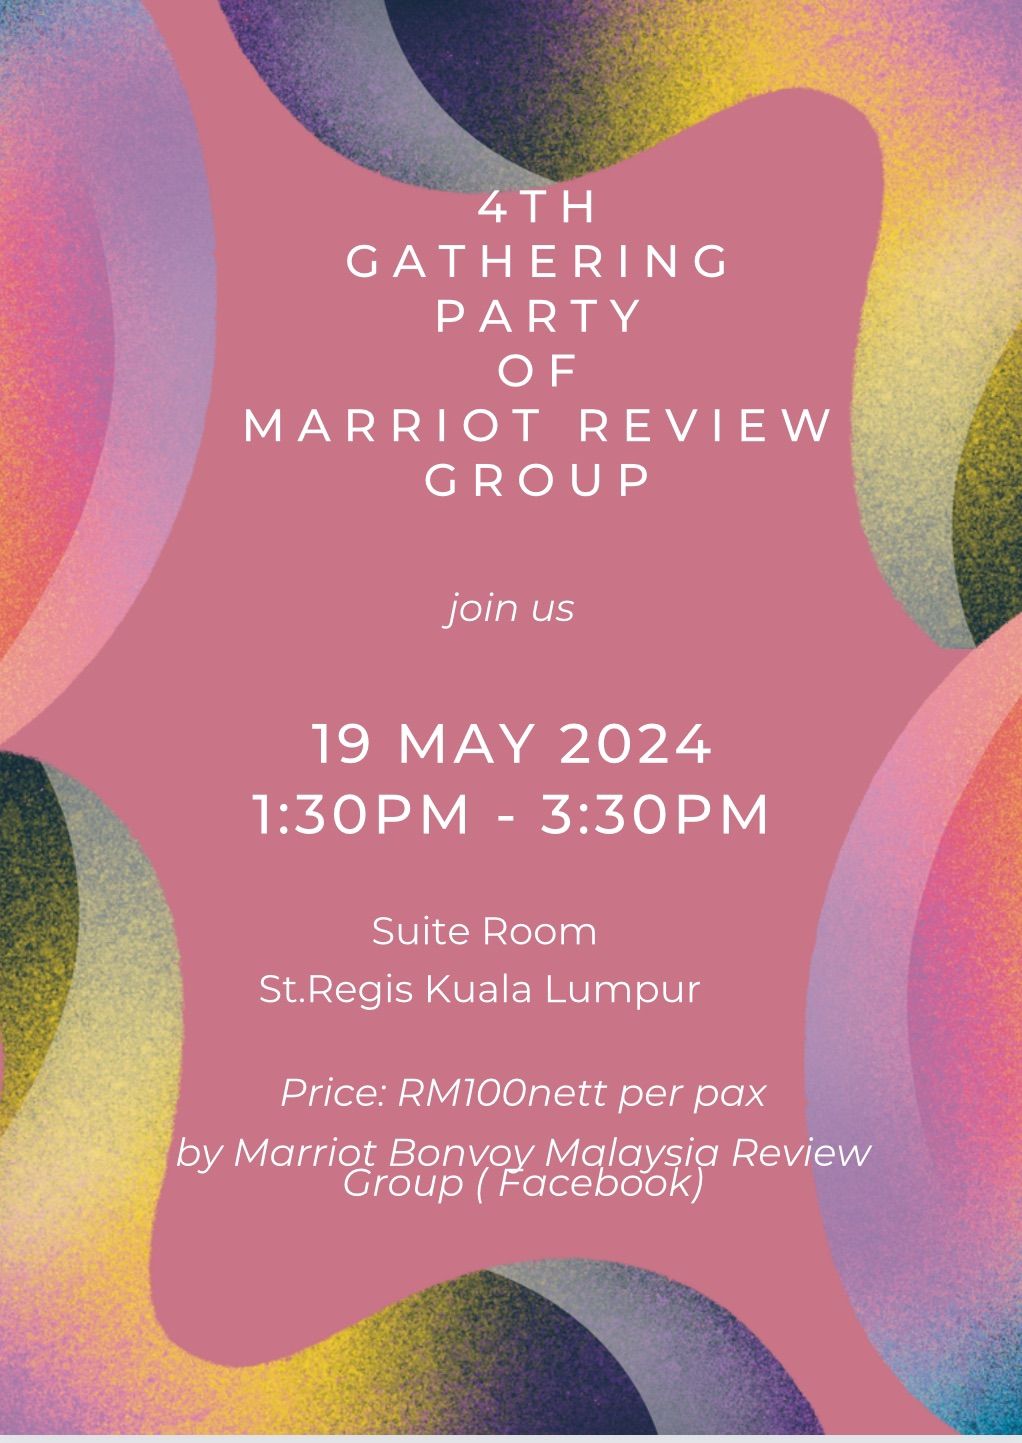 4th gathering party of Marriot Bonvoy Malaysia Review Group